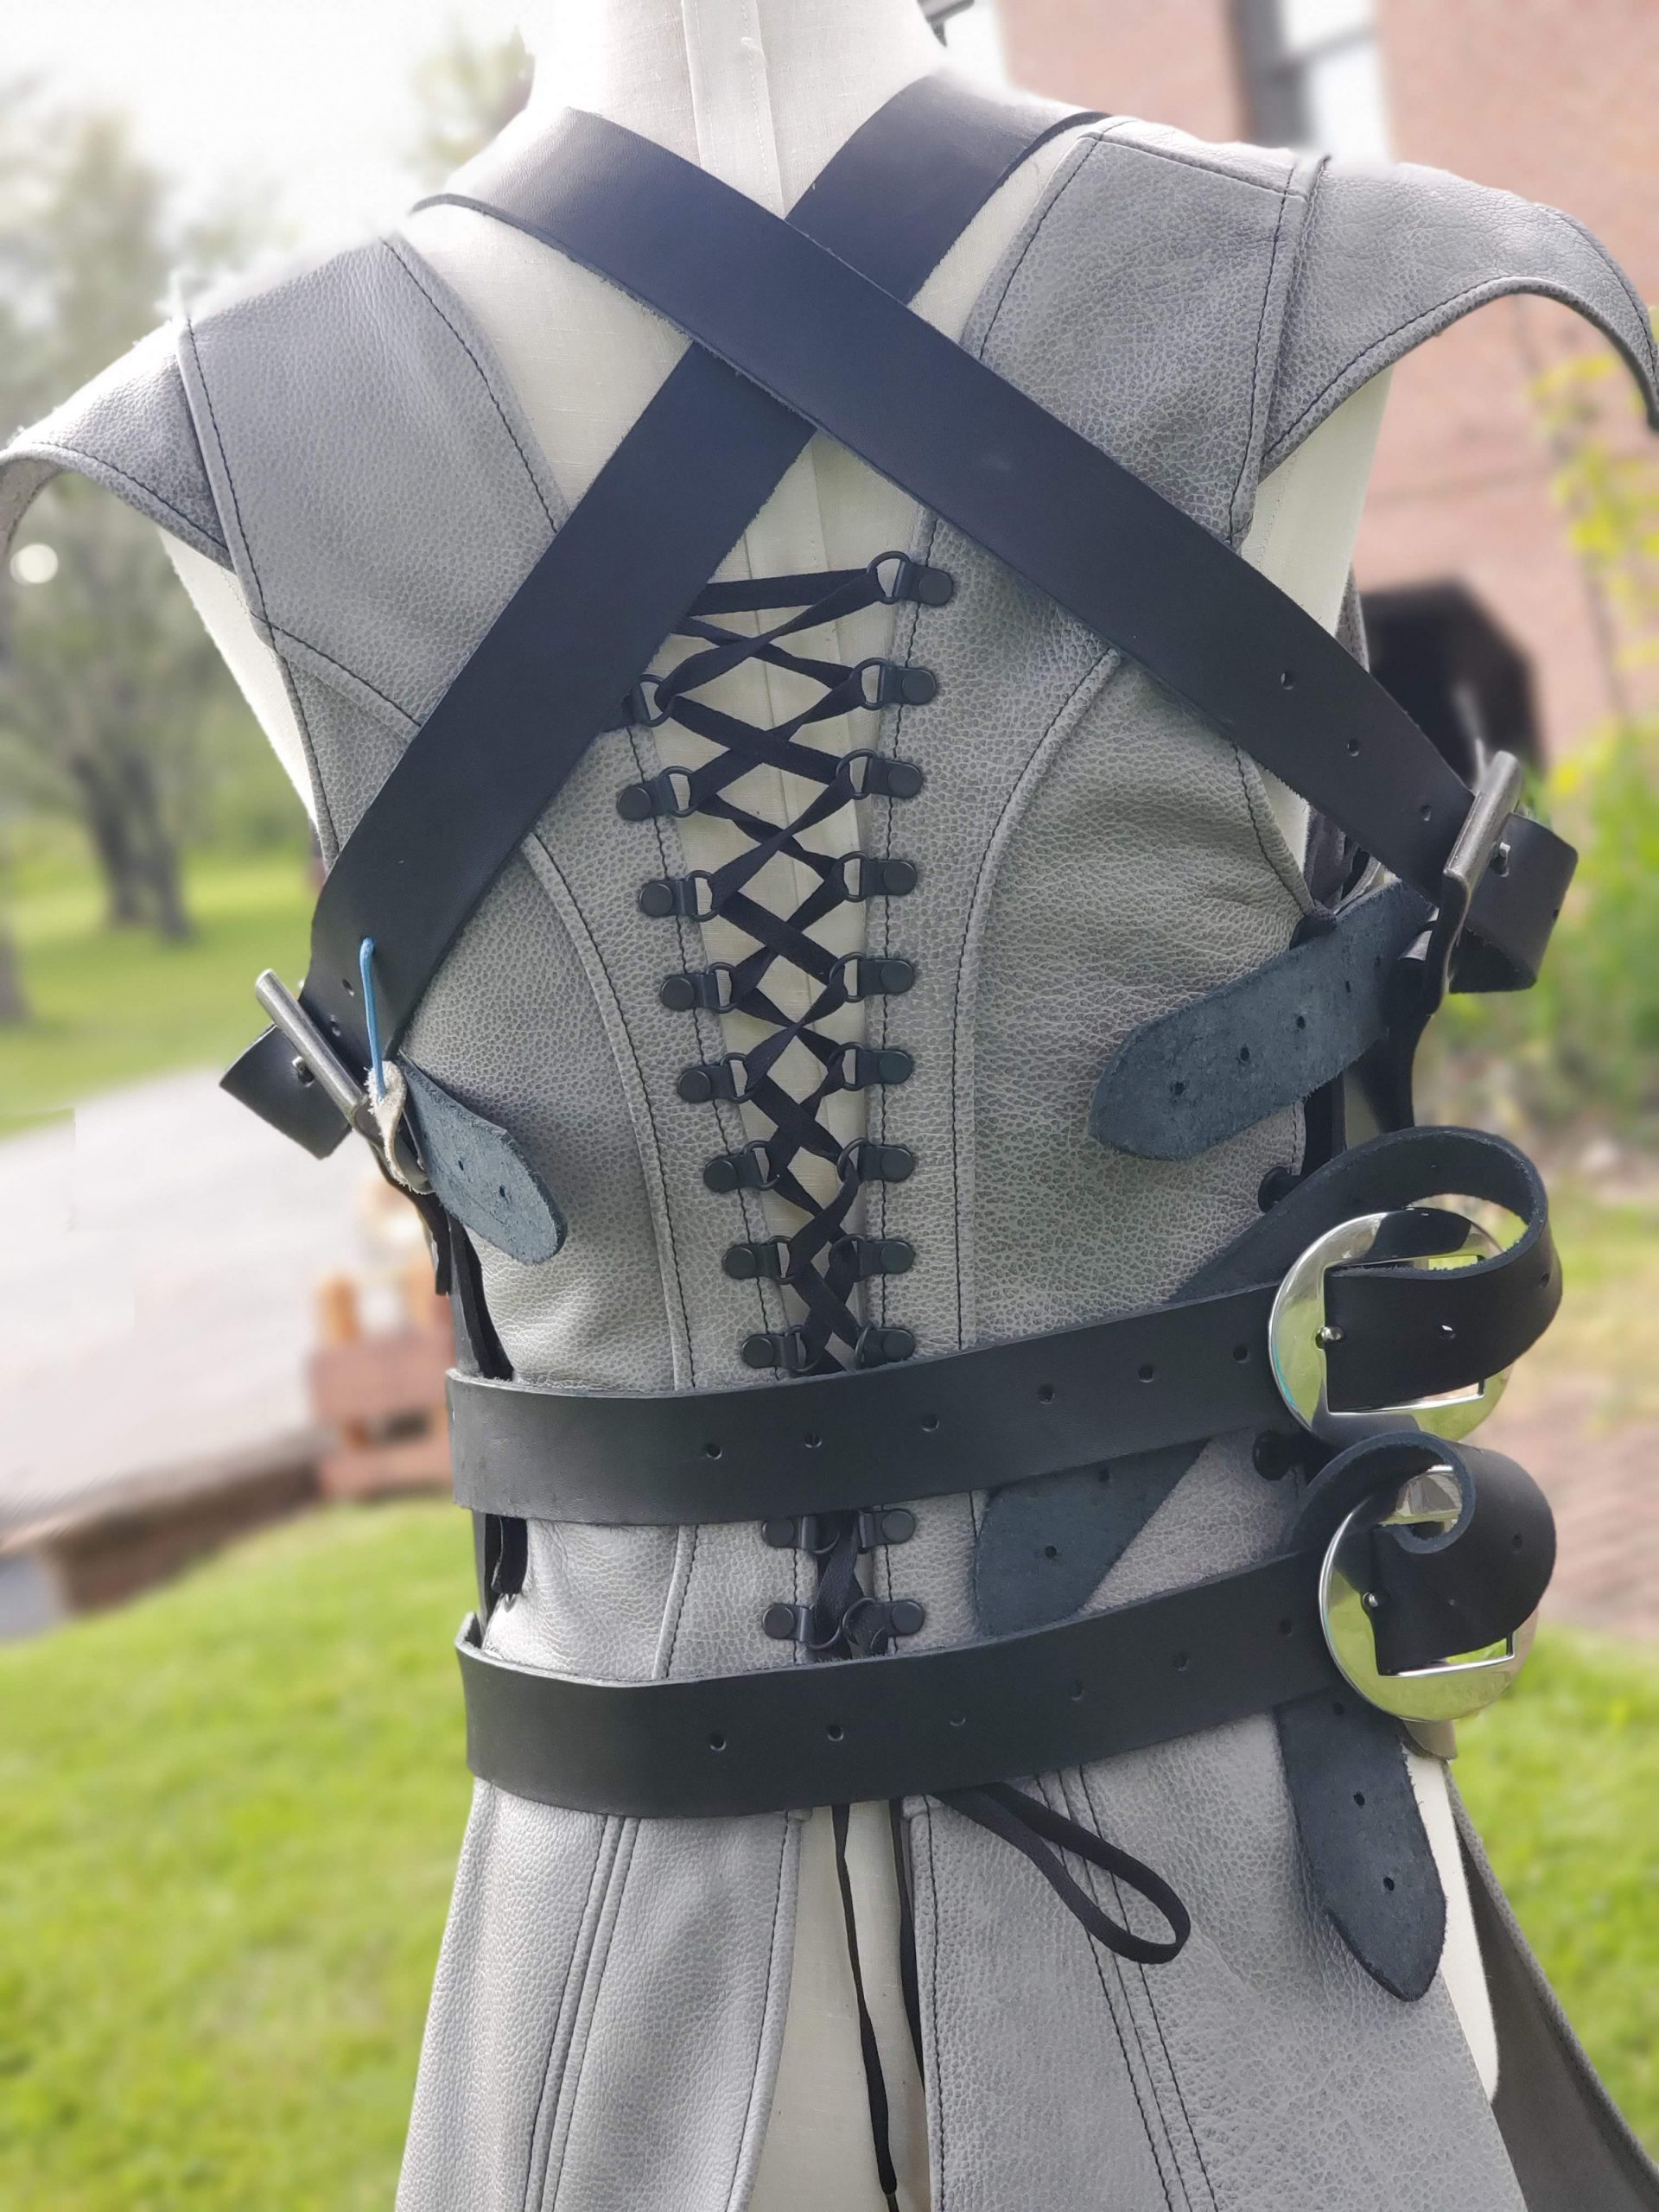 Layered Body Armour - creatively handmade by Red Falcon